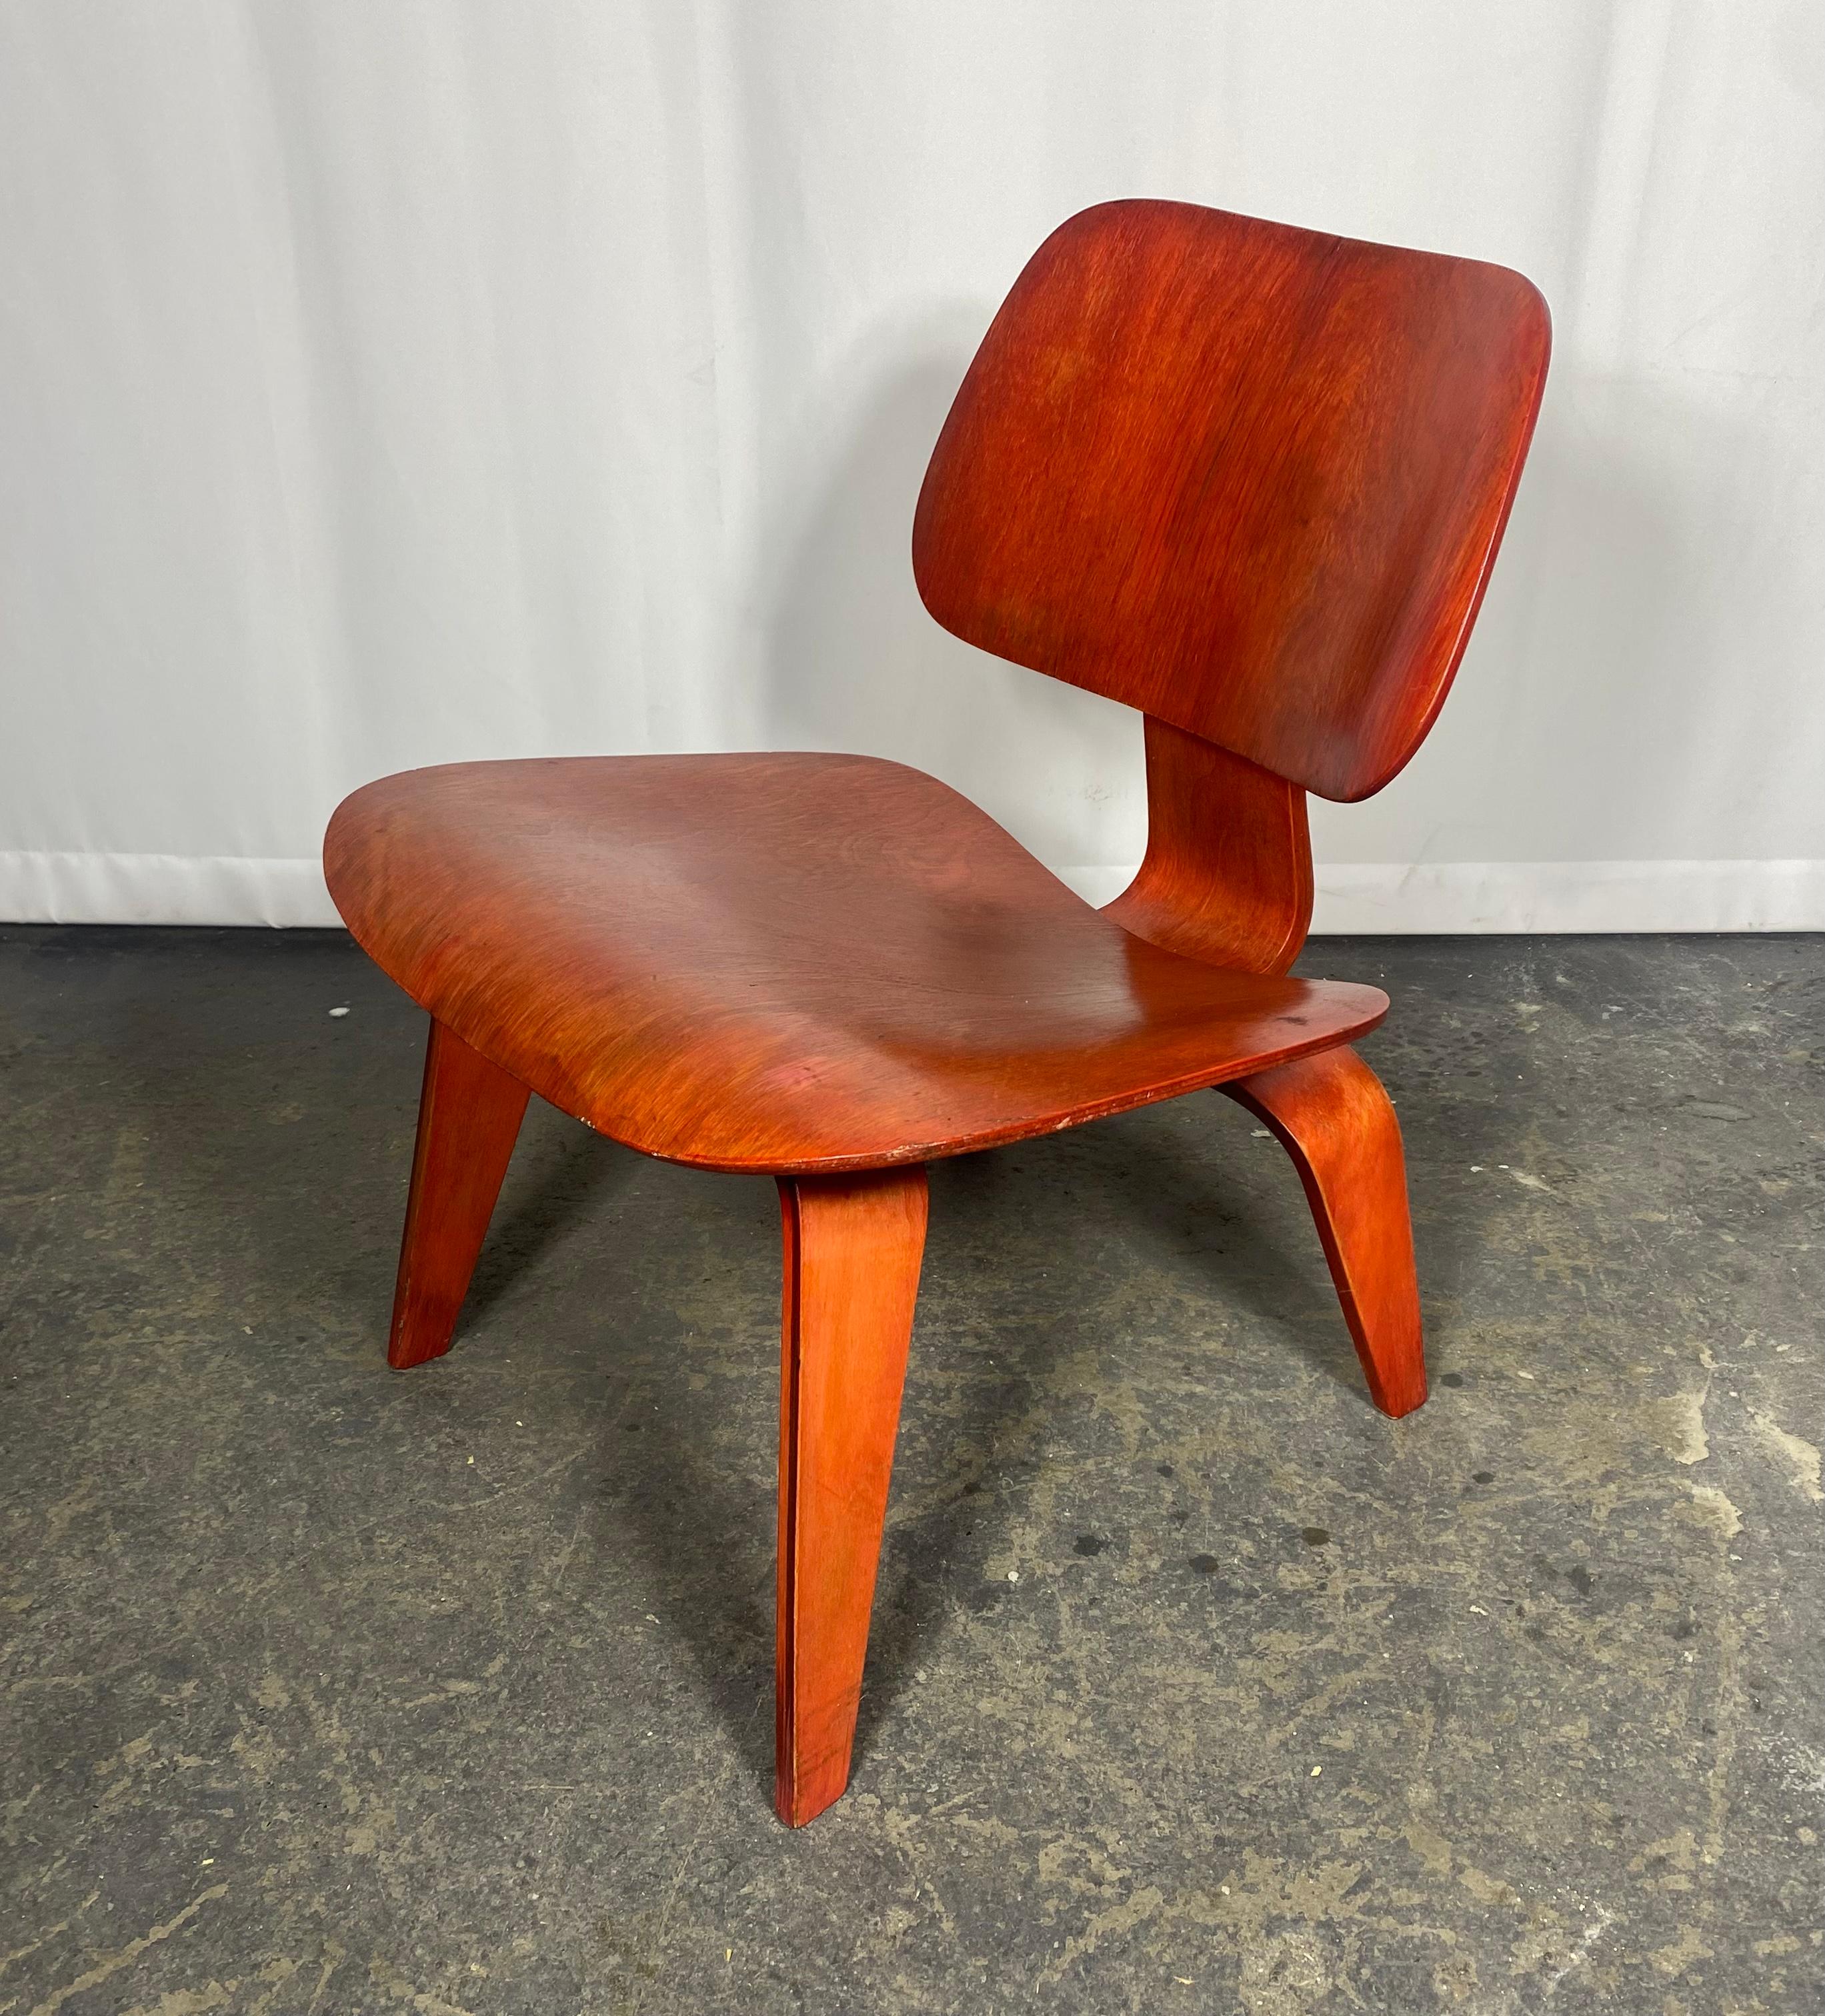 Mid-20th Century Early LCW Lounge Chair stained red by Charles & Ray Eames, Evans Plywood, 1950s For Sale